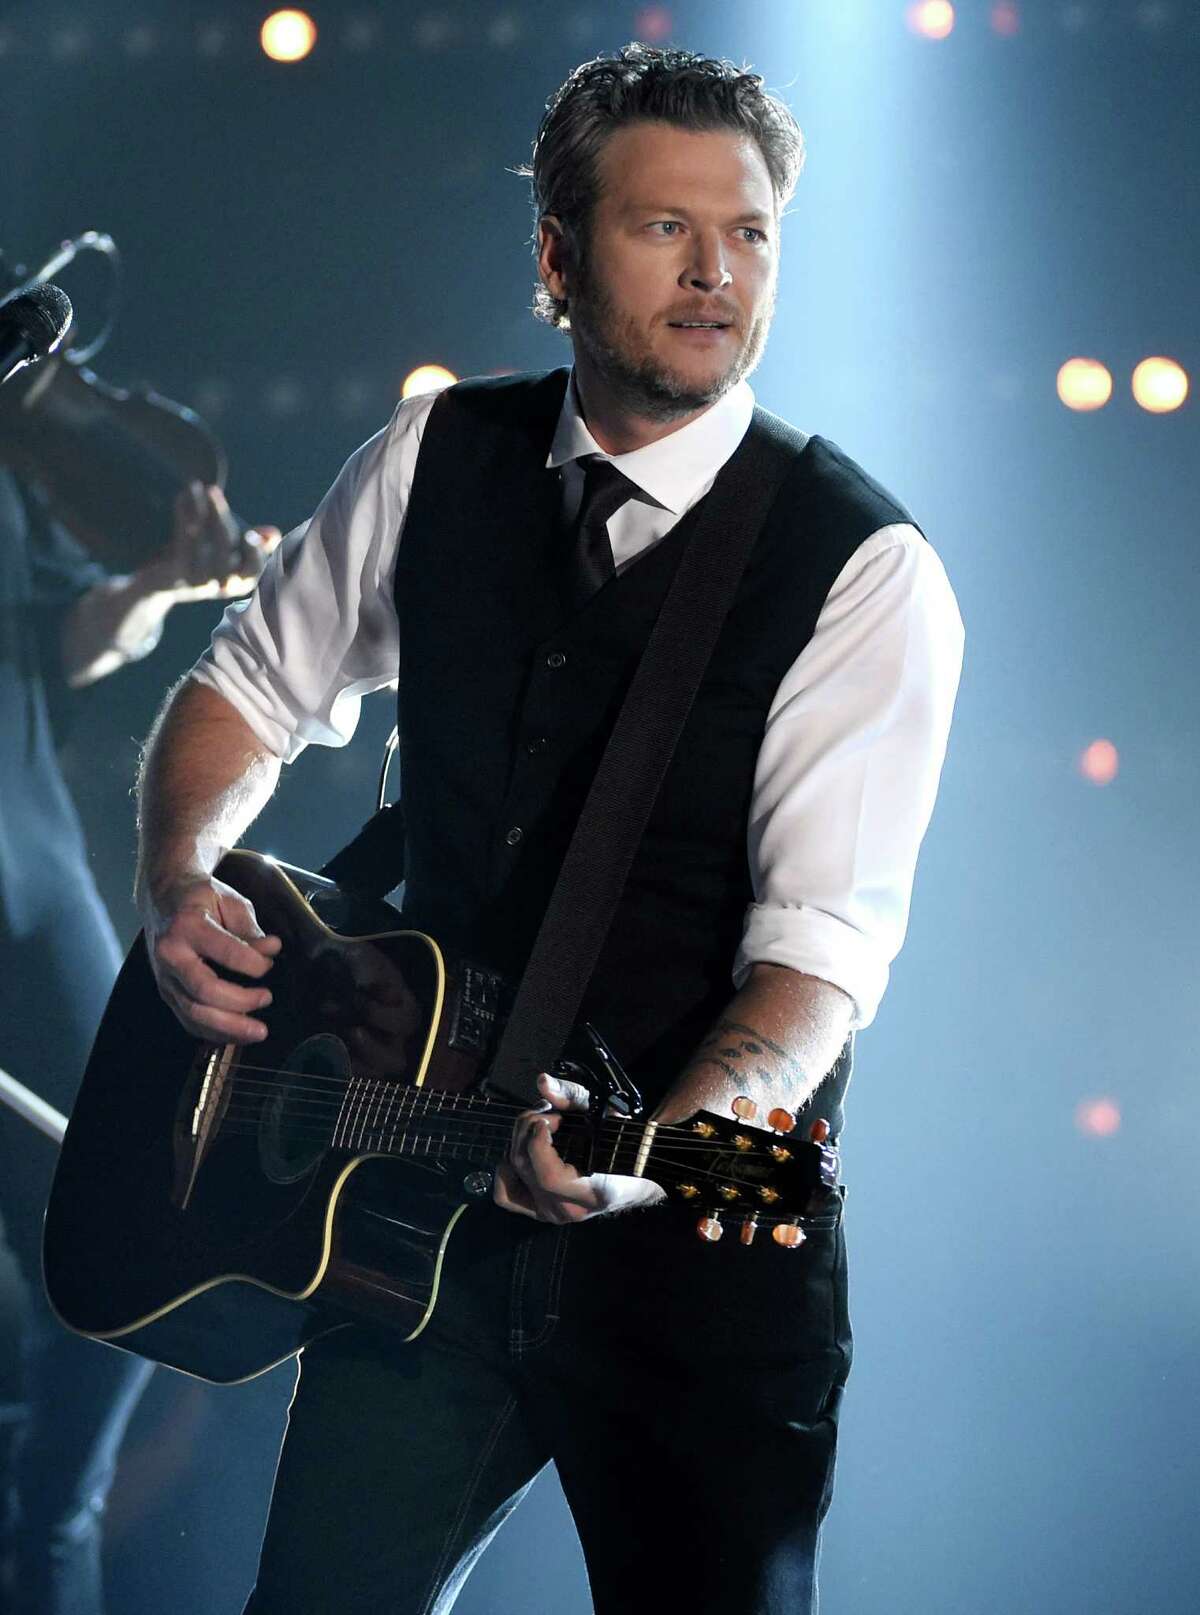 Blake Shelton is making a stop at Times Union Center in March. Keep clicking for more concerts coming soon.